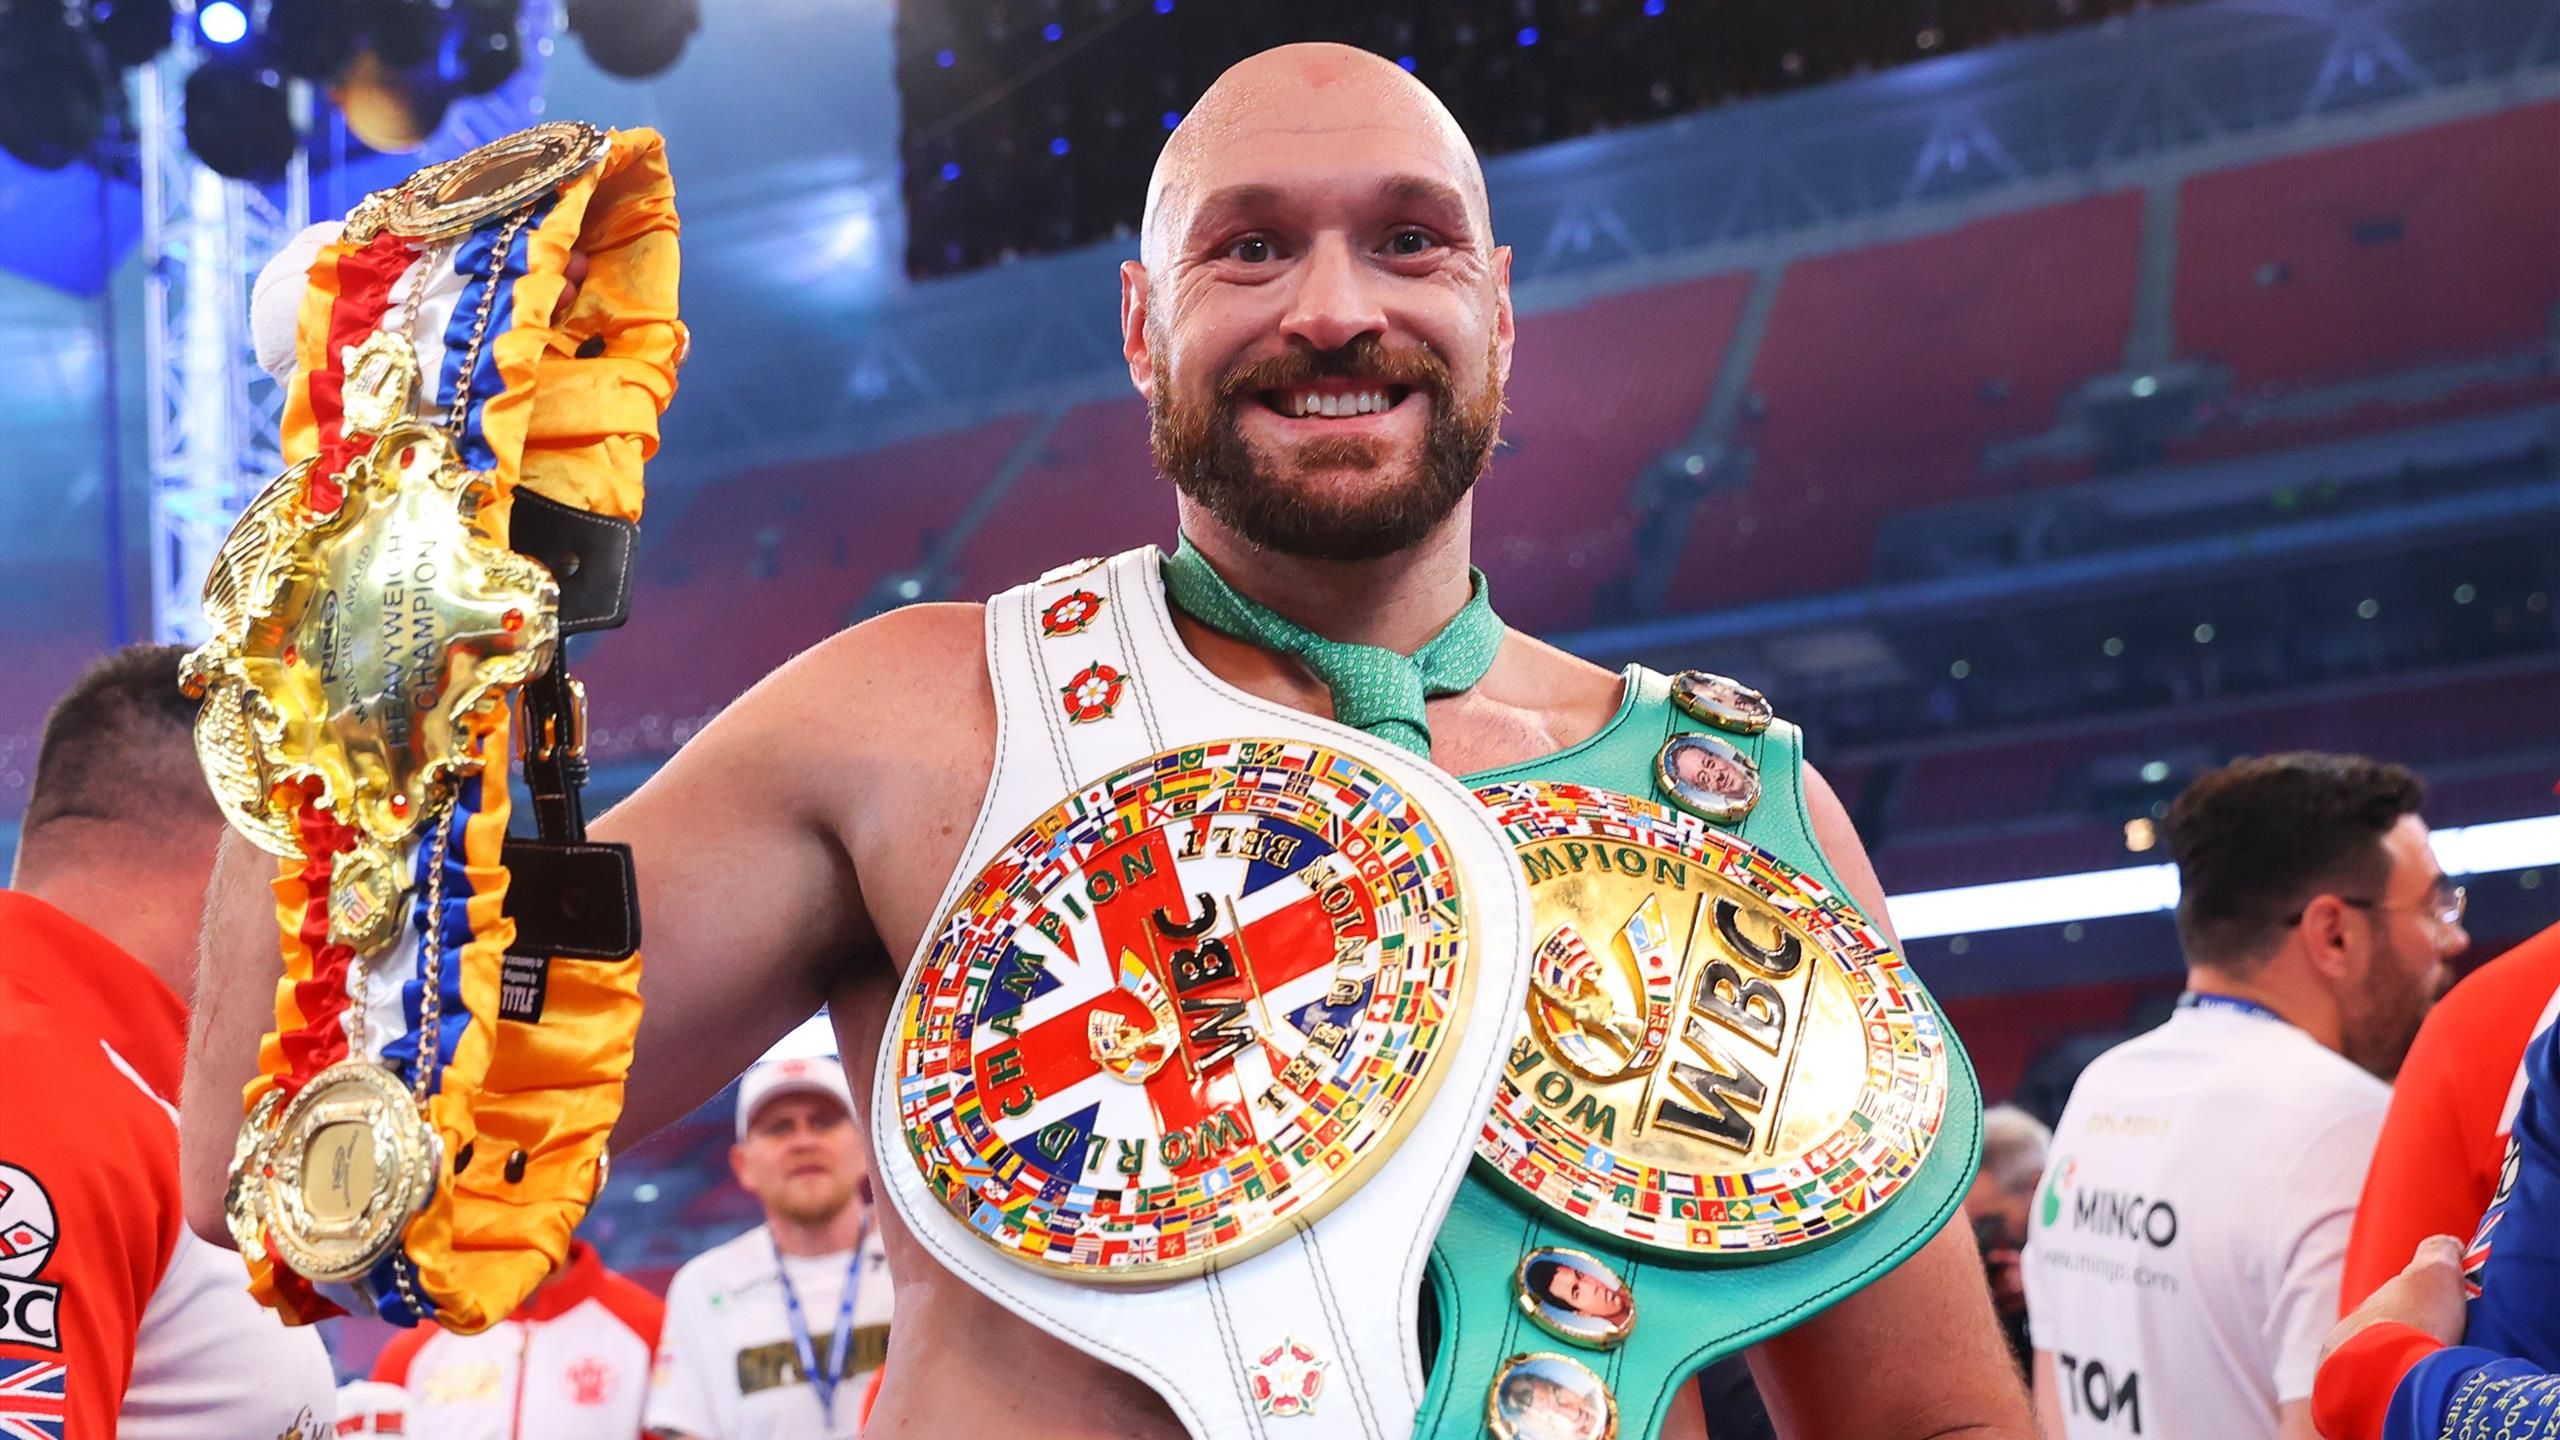 Tyson Fury knocks out Dillian Whyte in sixth round to defend WBC heavyweight title at Wembley Stadium